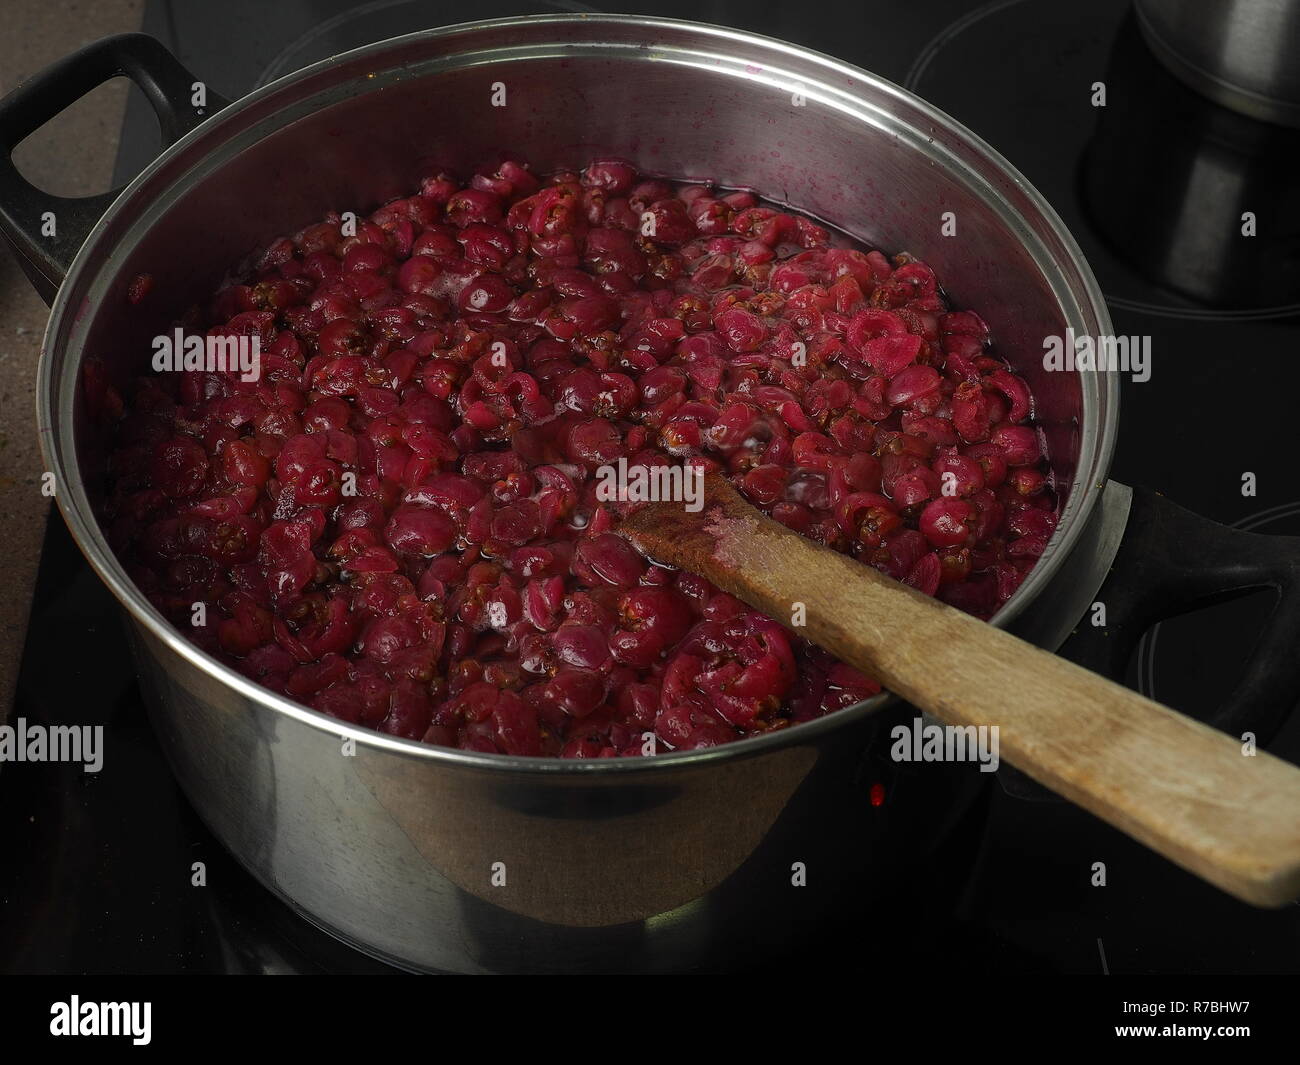 Australian bushtucker Lilly Pilly fruit being made into Lilly Pilly jam. An Australian native wild fruit that is edible and beautiful. Stock Photo